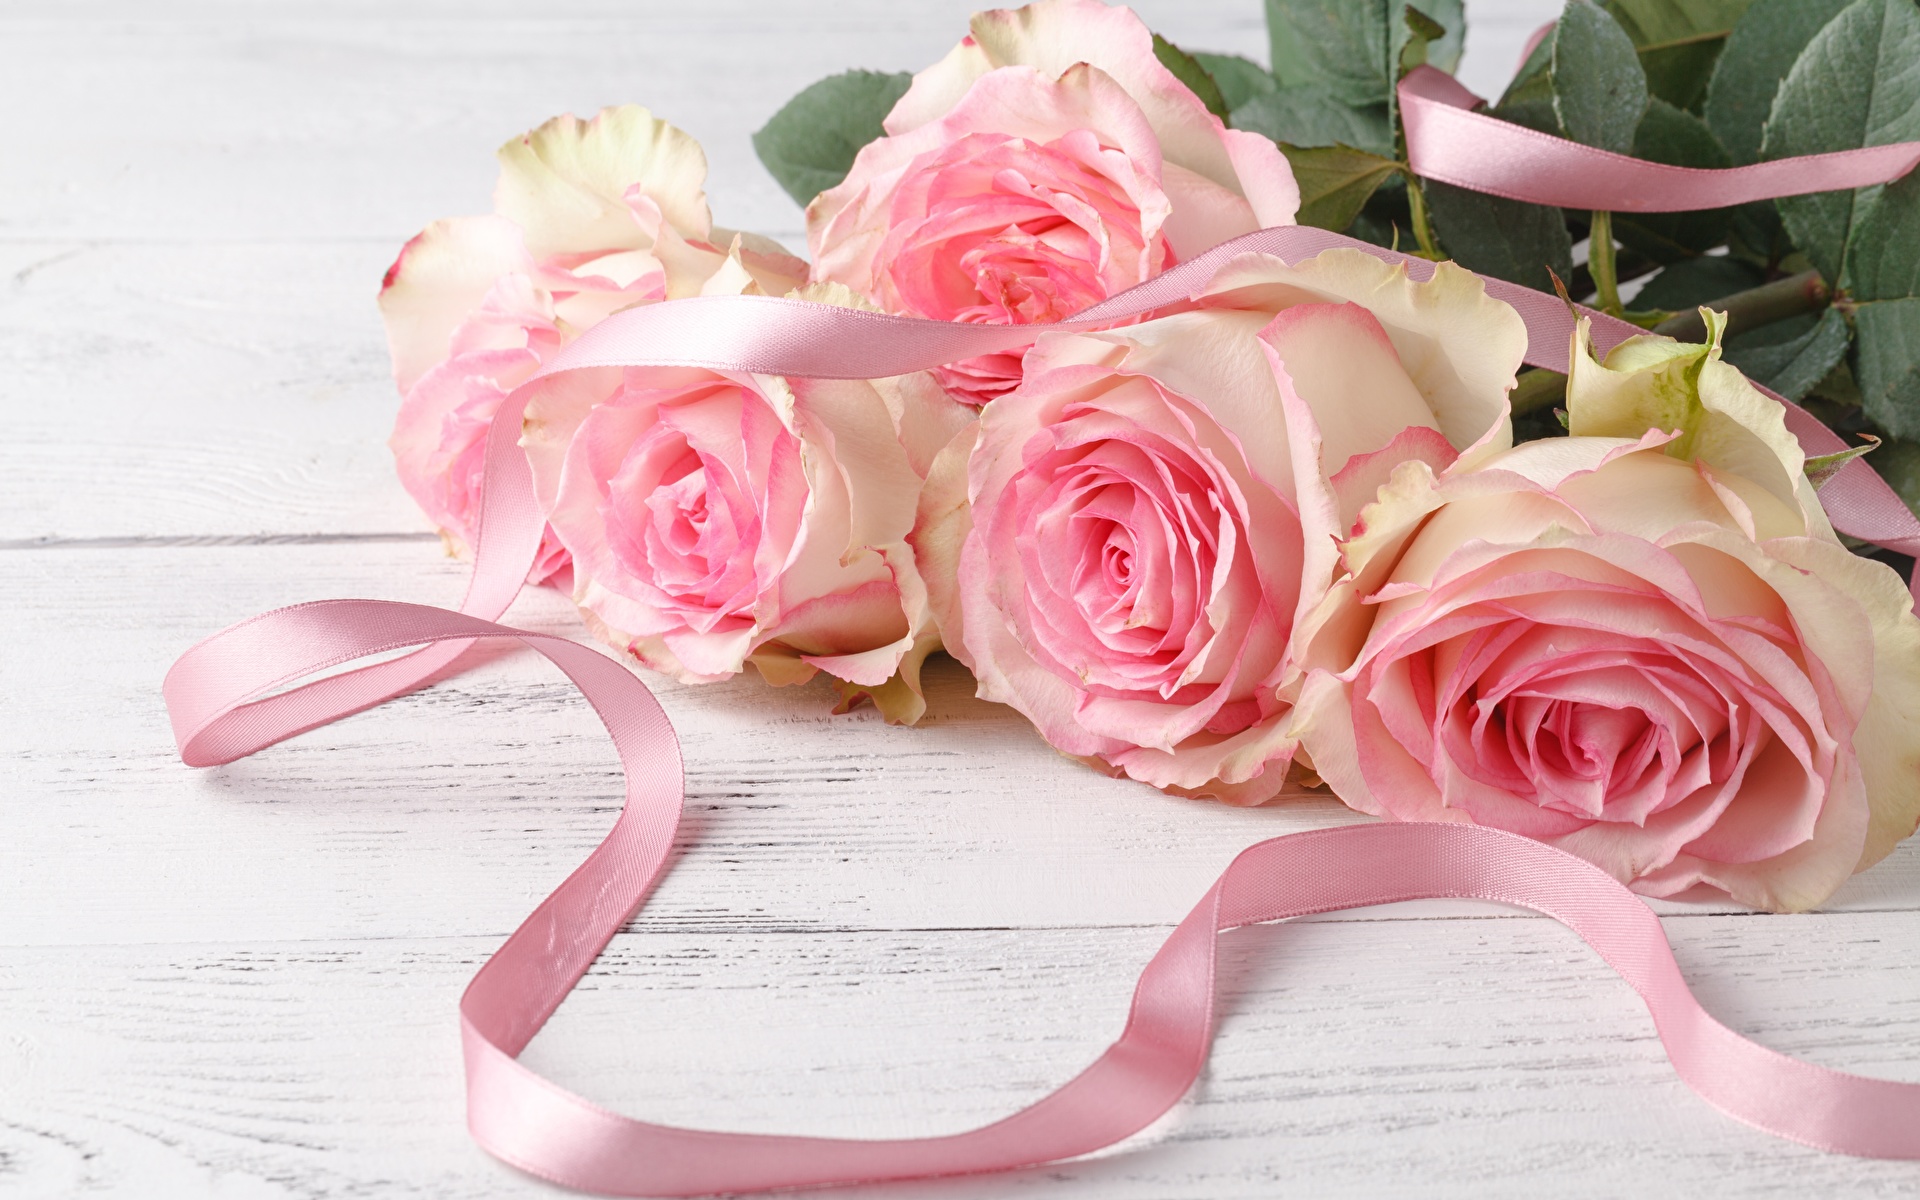 Roses_Bouquets_Ribbon_Pink_color_584859_1920x1200.jpg